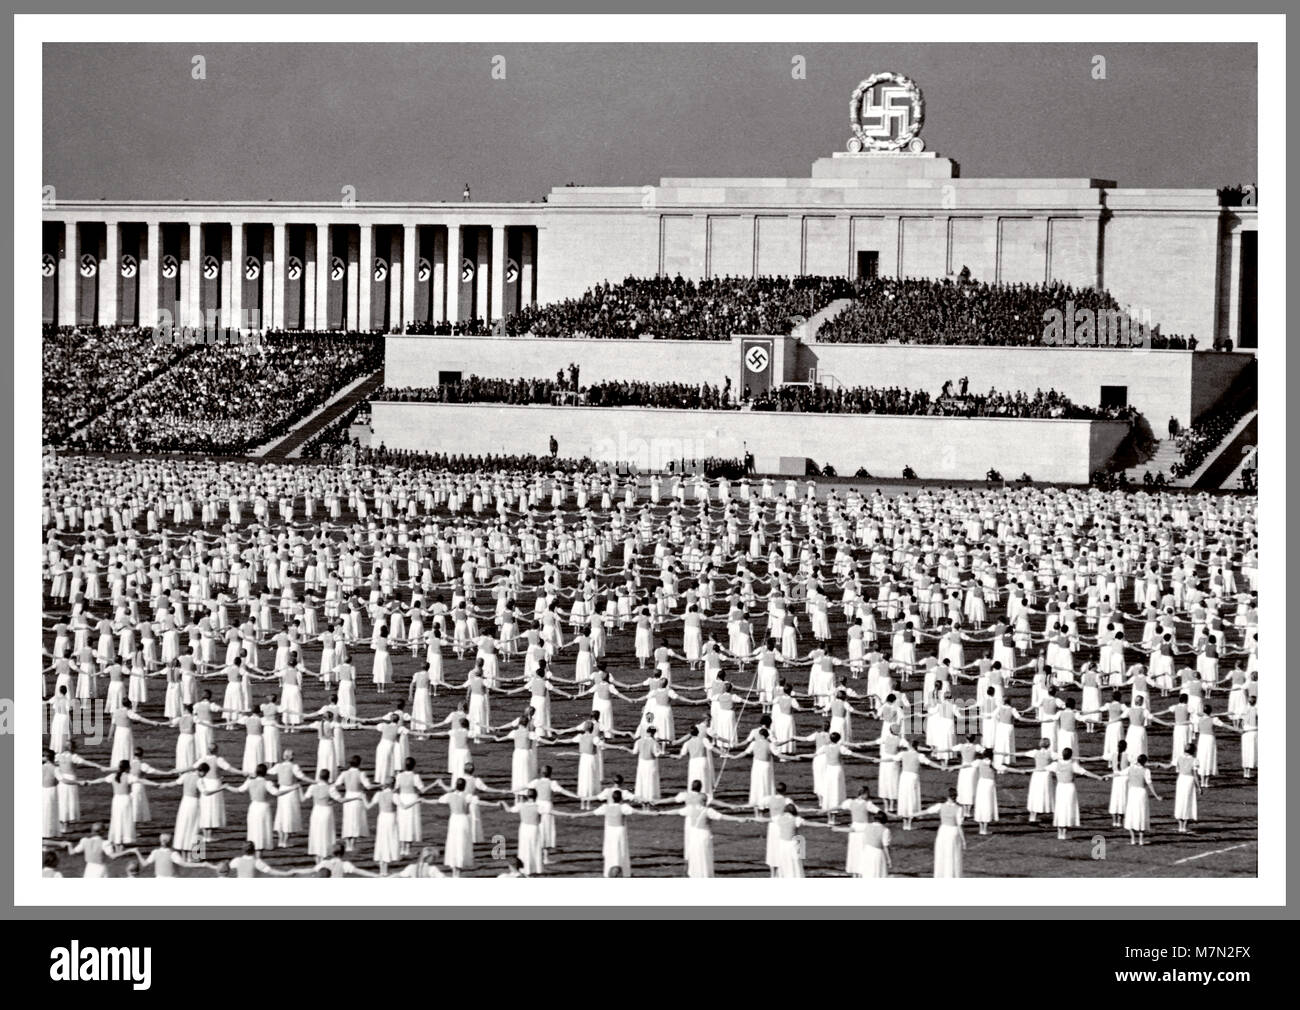 1930's Nazi propaganda image of Nuremberg Rally Reichsparteitag  Realm Party Convention. It was the annual rally of the Nazi Party in Germany, held from 1923 to 1938. They were large Nazi propaganda events, especially after Adolf Hitler's rise to power in 1933. These events were held at the Nazi party rally grounds in Nuremberg from 1933 to 1938 and are usually referred to as the 'Nuremberg Rallies'. Stock Photo